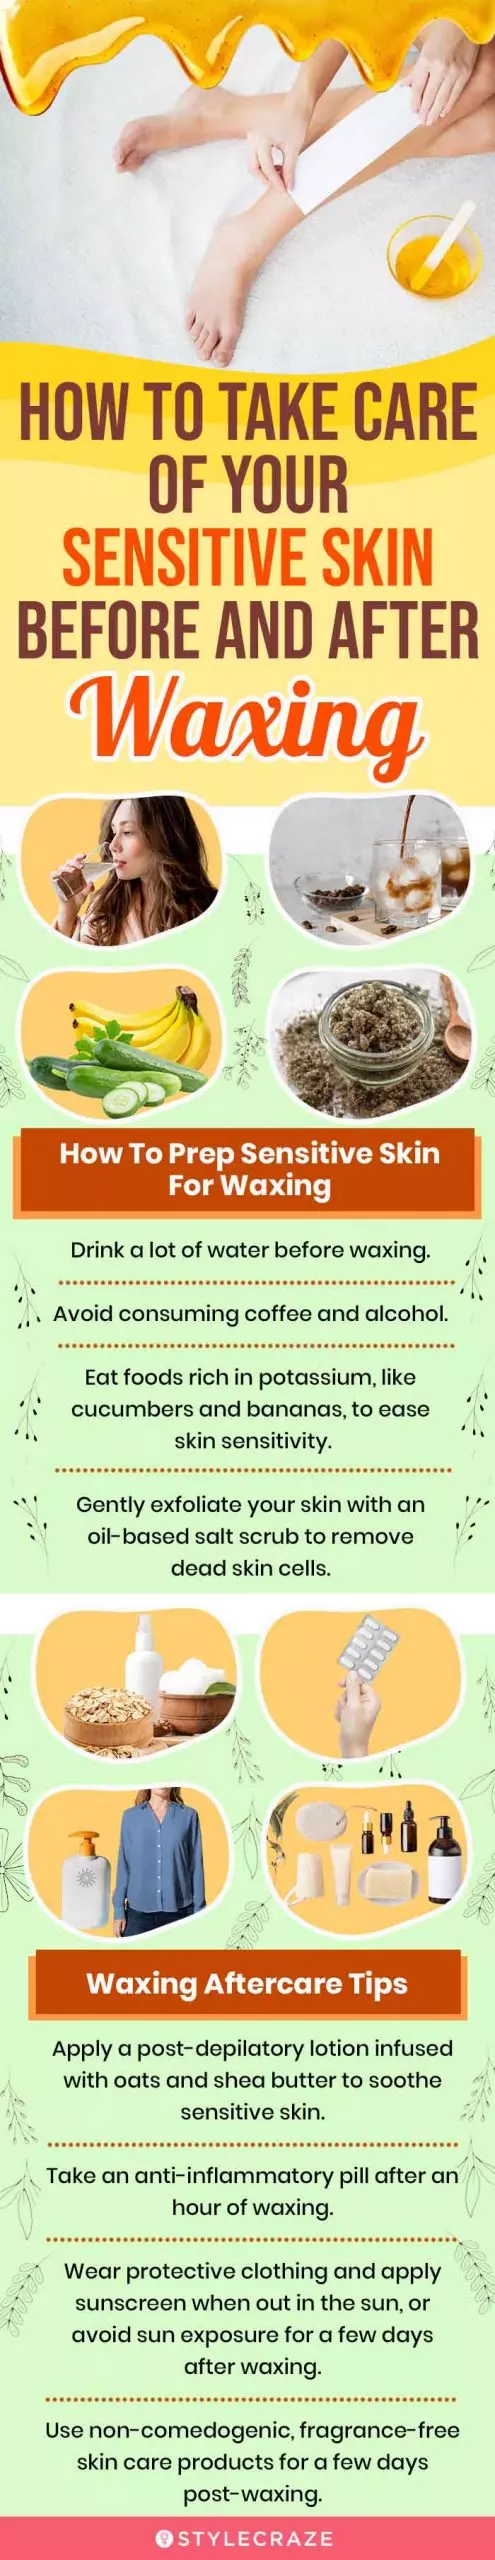 How To Take Care Of Your Sensitive Skin Before And After Waxing (infographic)